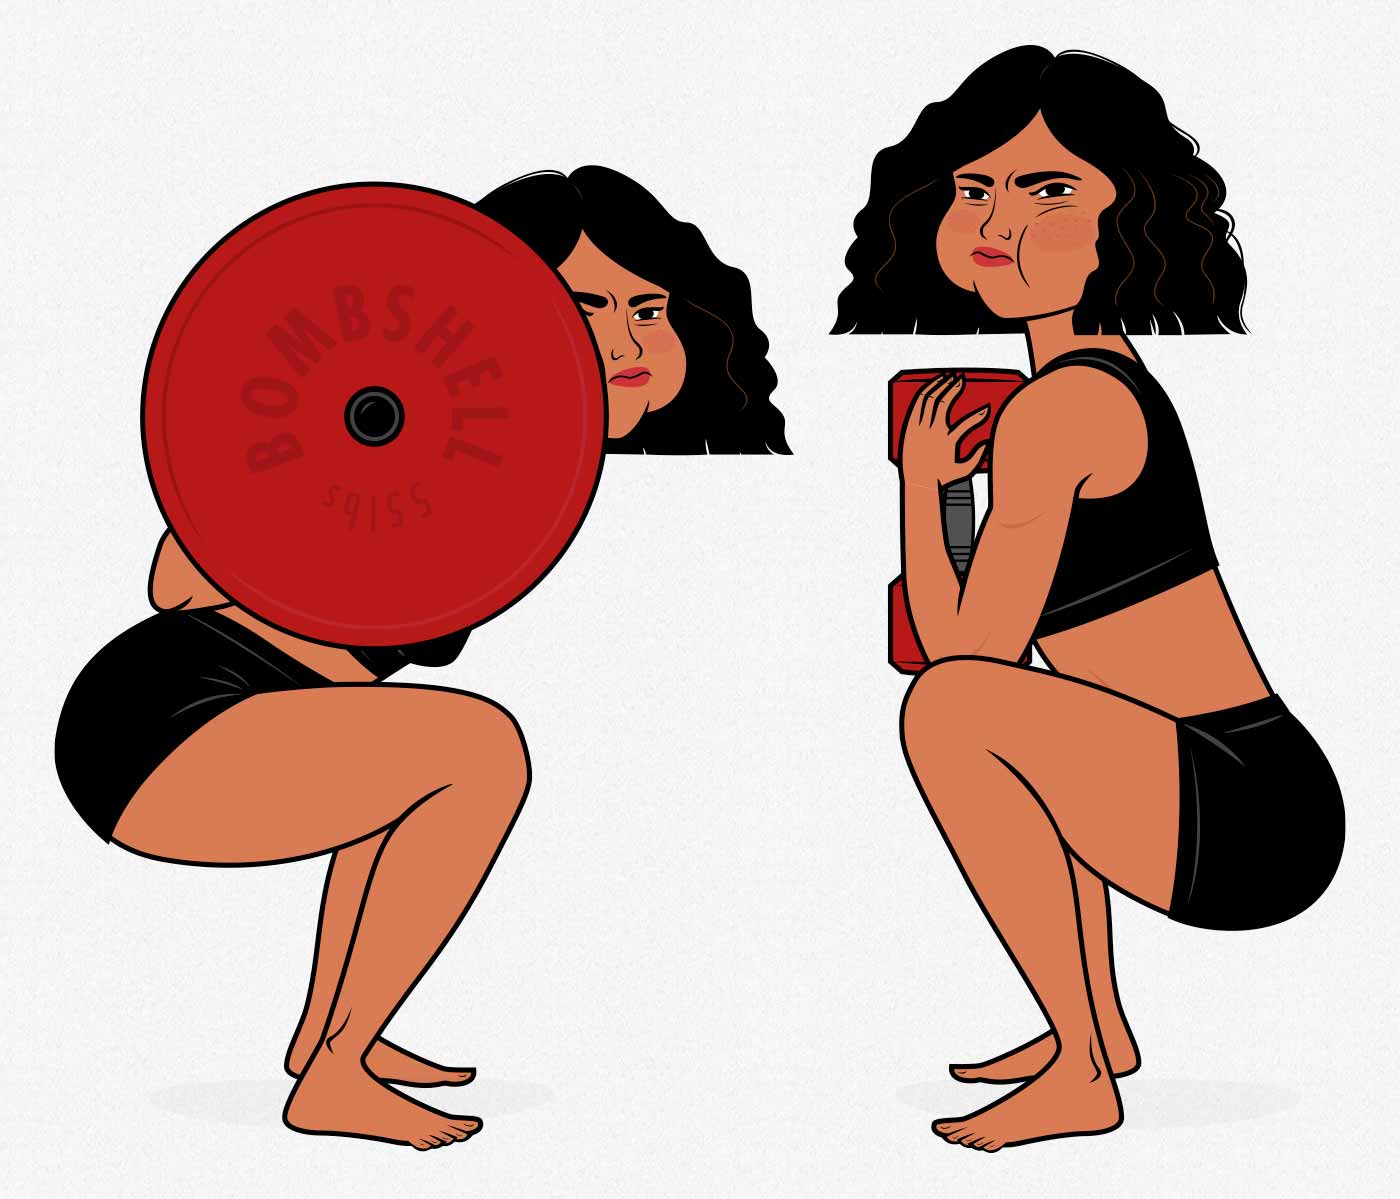 Illustration of women using a barbell or dumbbell home gym to gain muscle and strength at home.